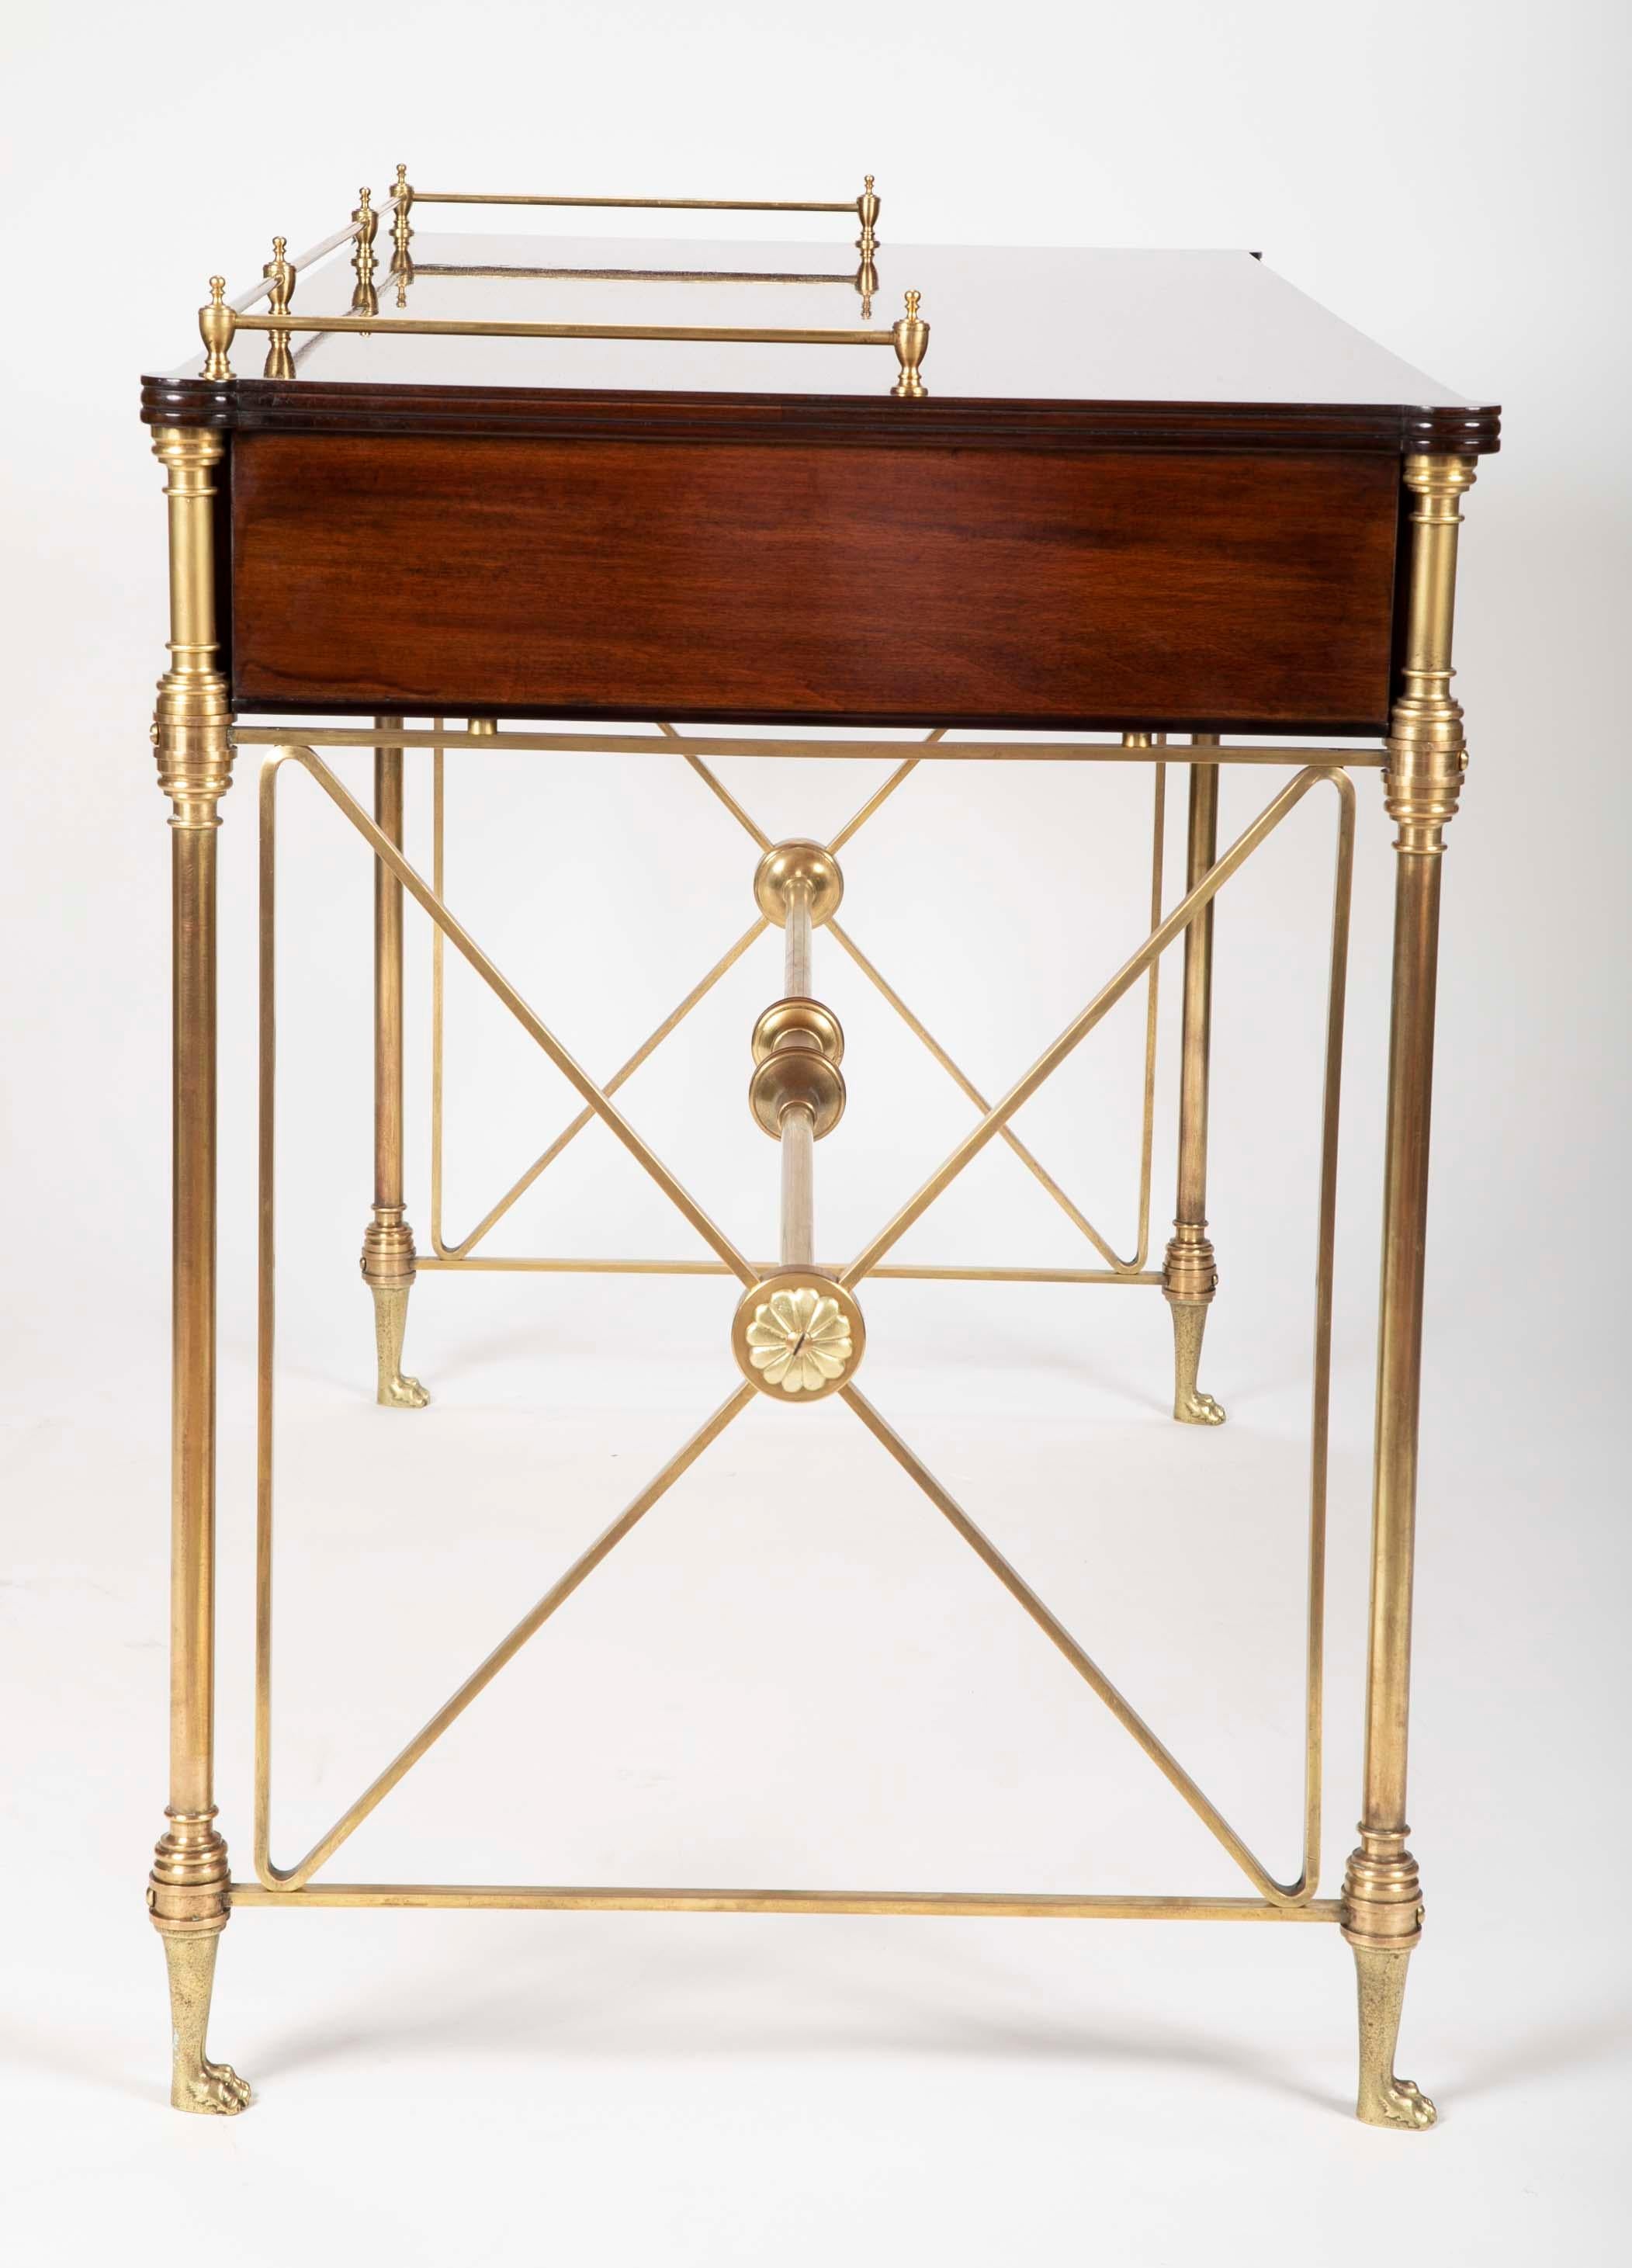 American Regency Style Rosewood and Bronze Campaign Desk